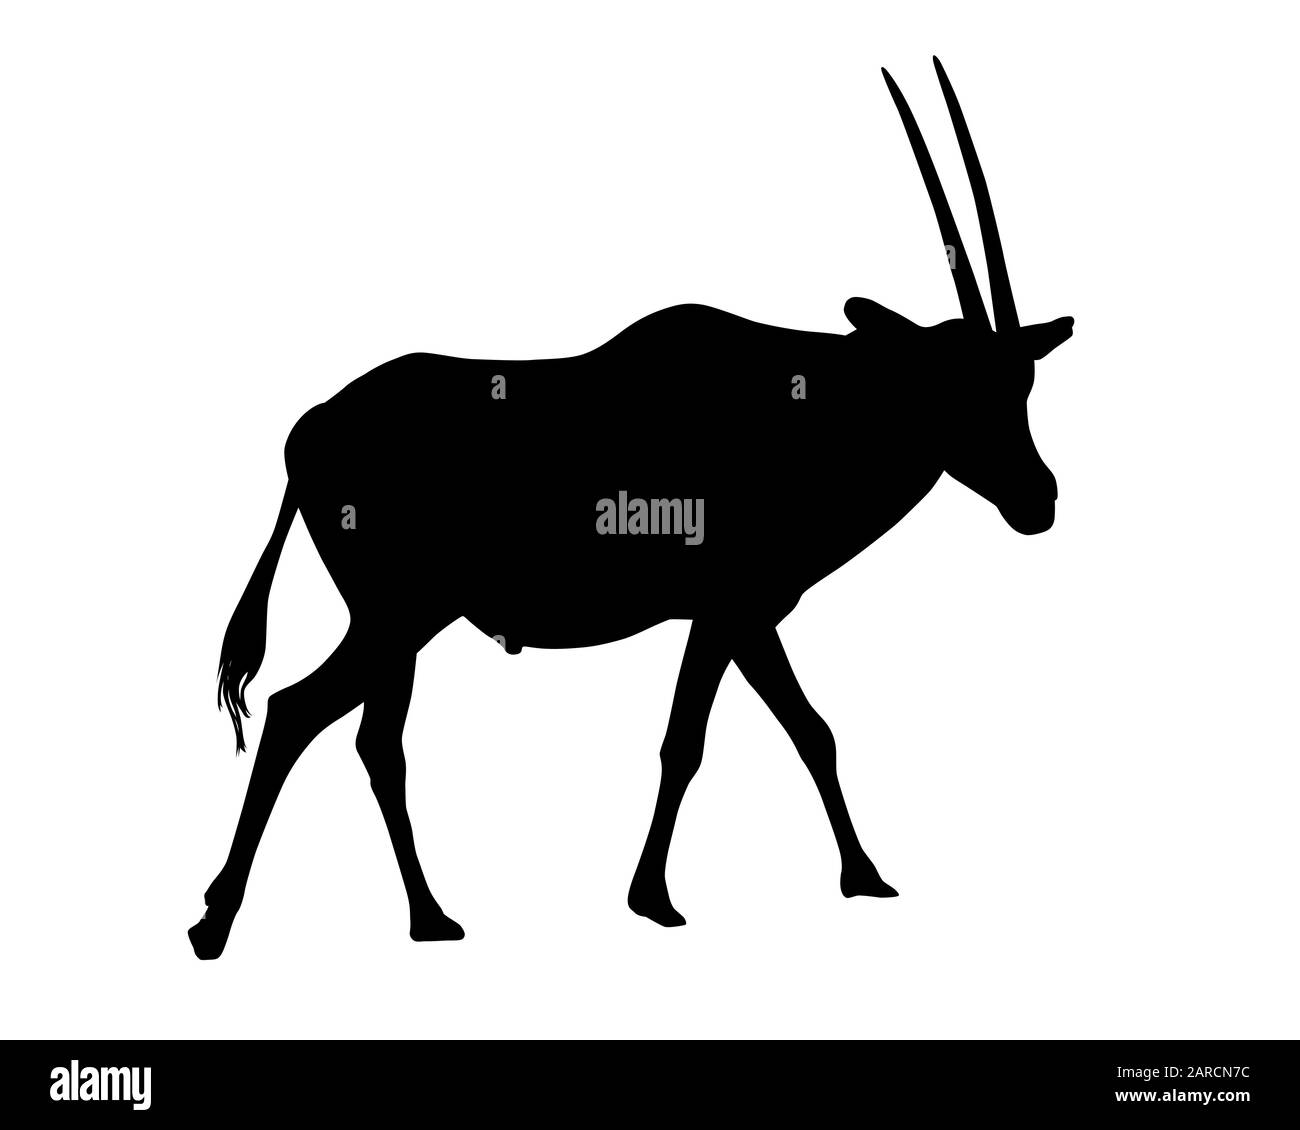 Realistic illustration of silhouettes of gazelle or antelope. Horned oryx standing - vector Stock Vector